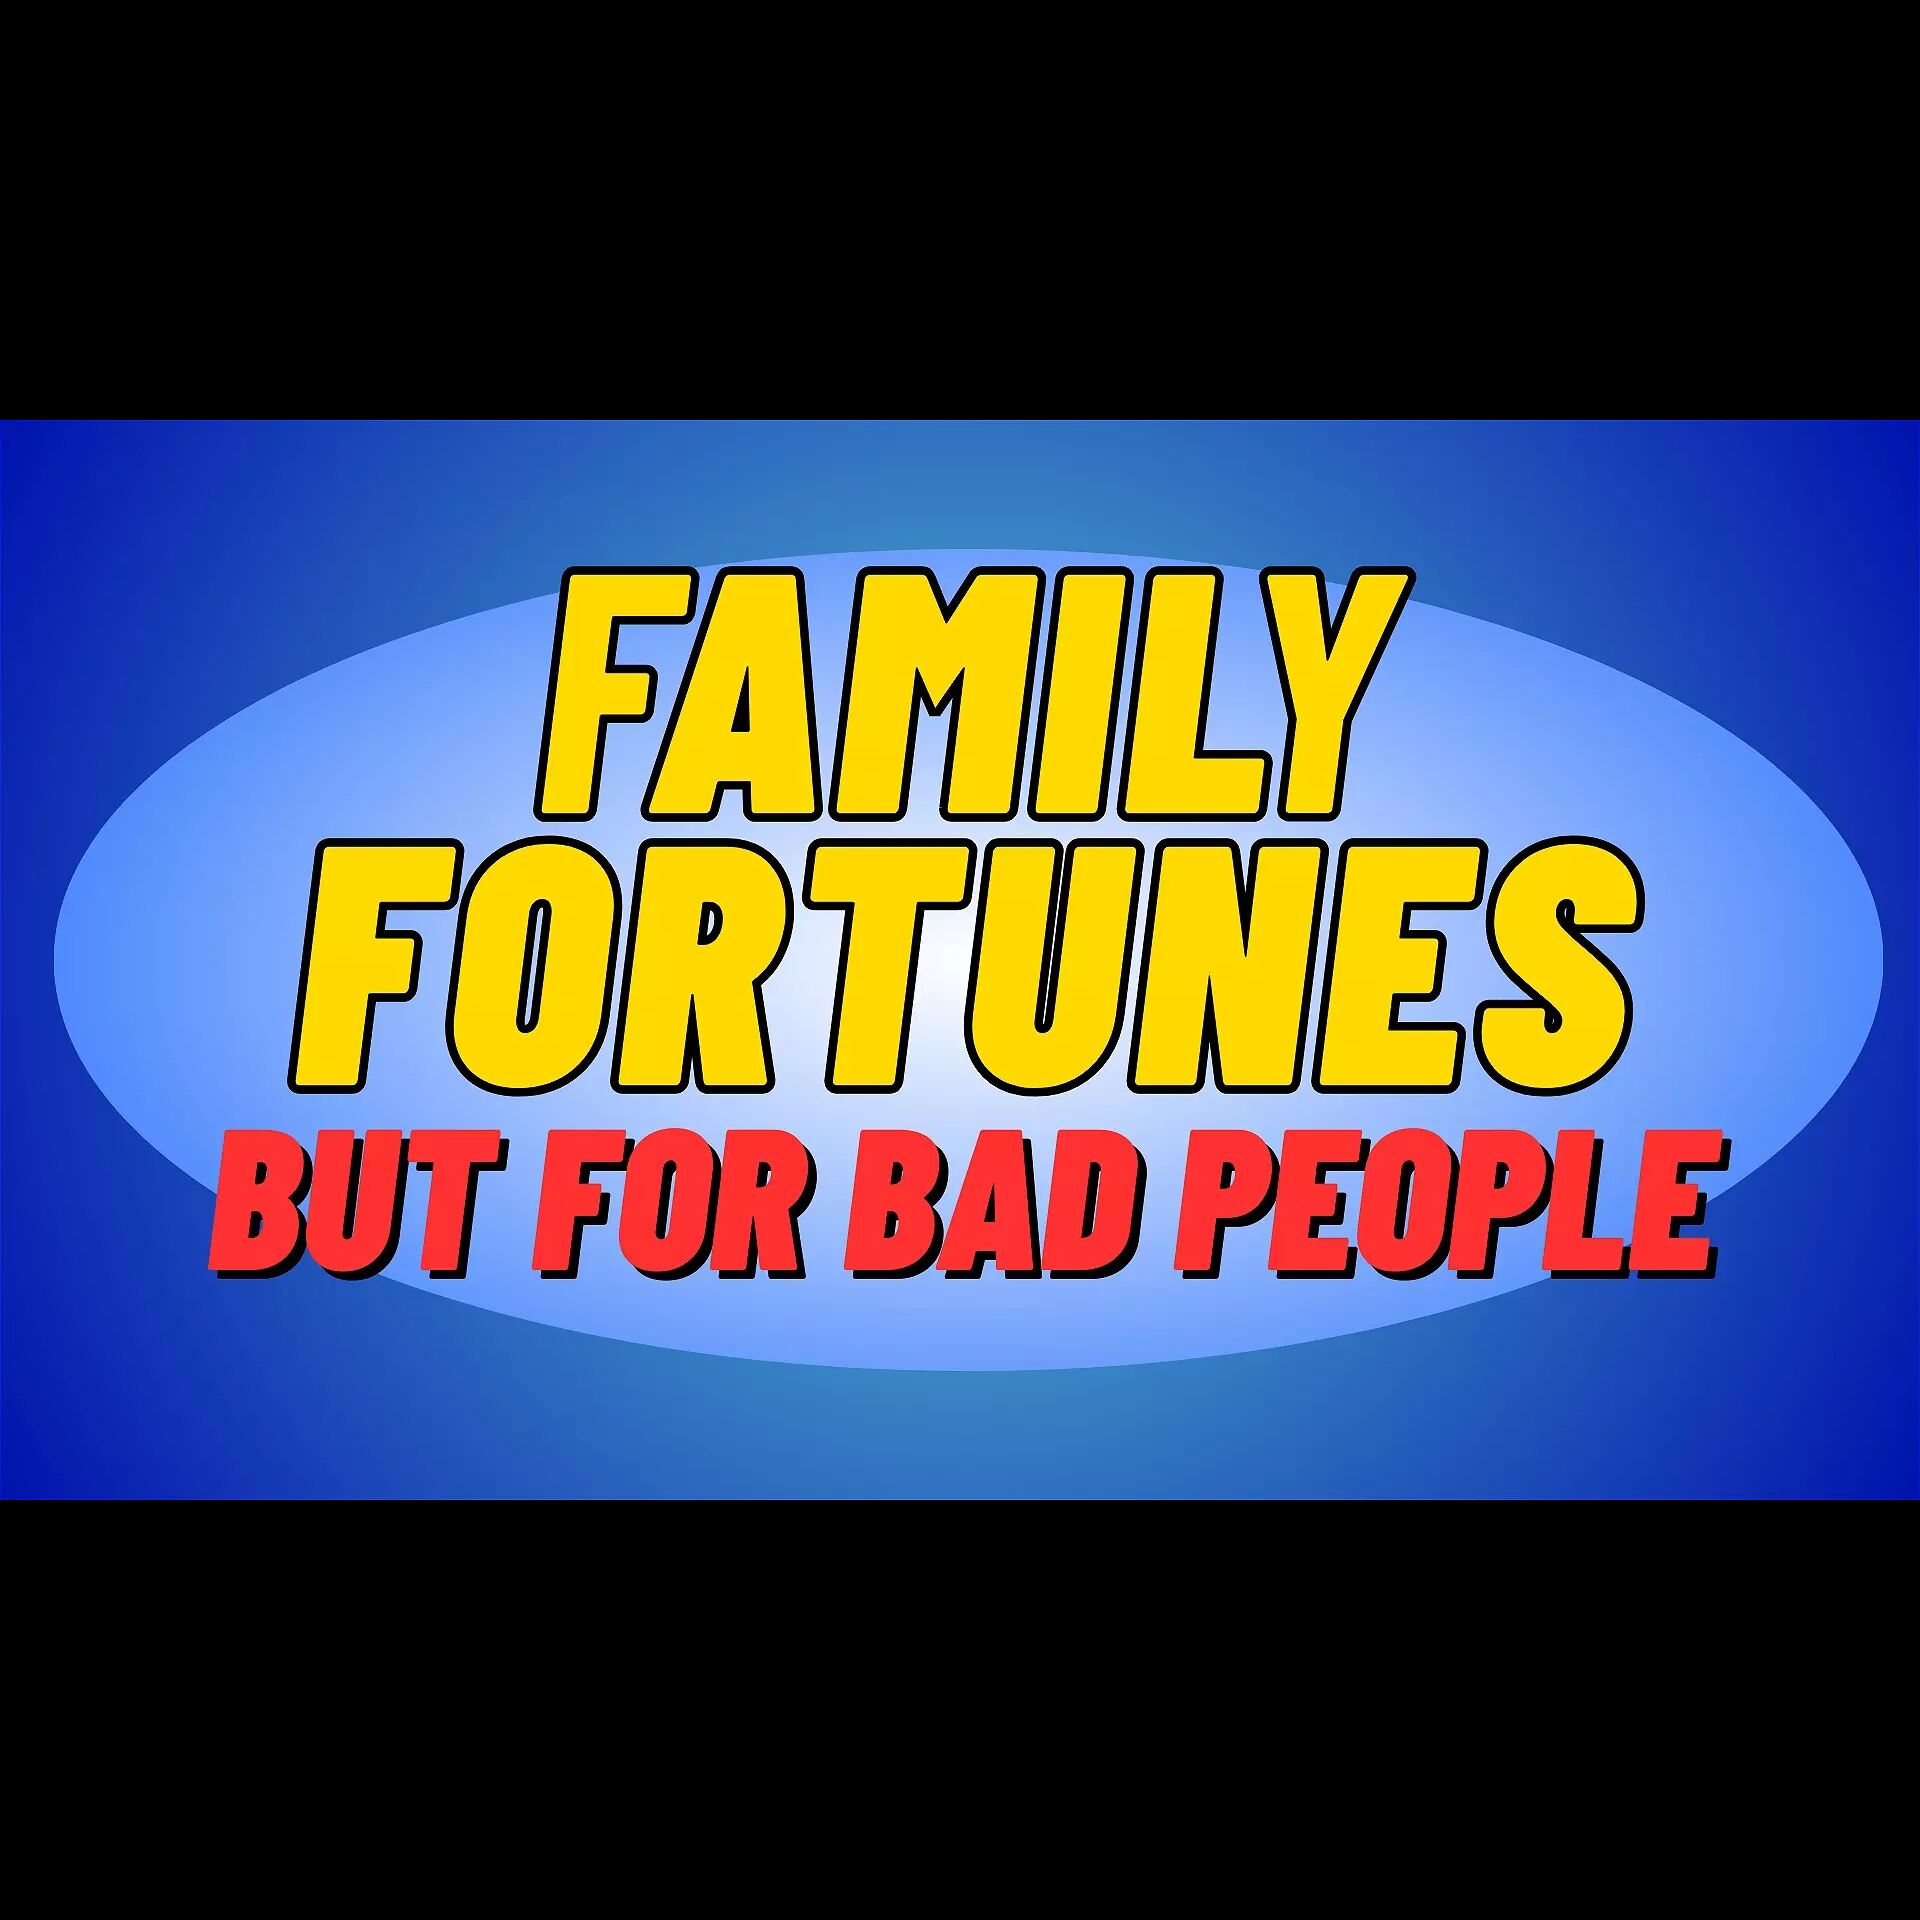 Family Fortunes (but for bad people)